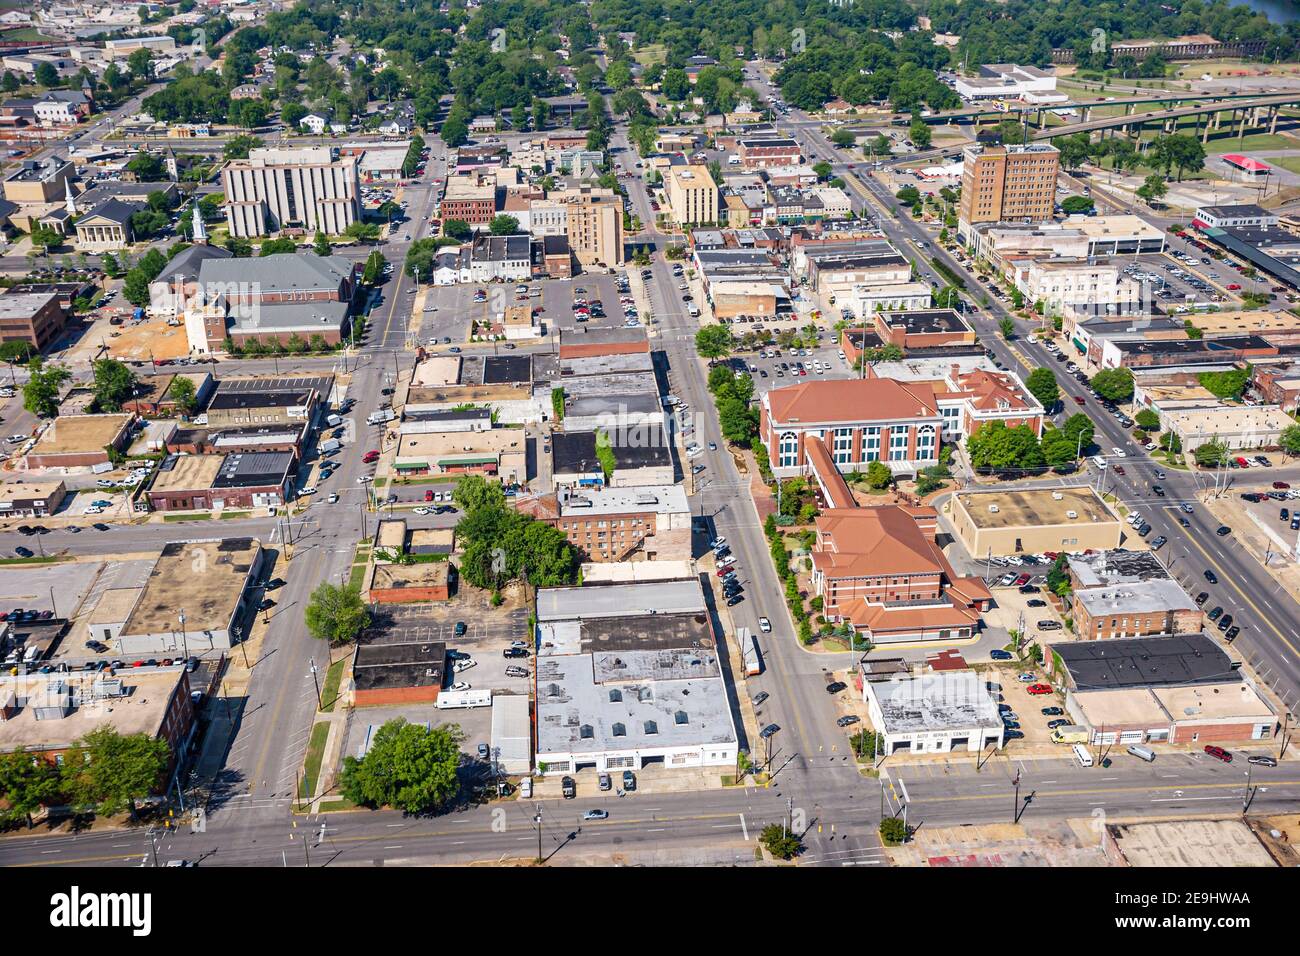 Tuscaloosa Alabama,downtown city center centre,aerial overhead view,business district, Stock Photo